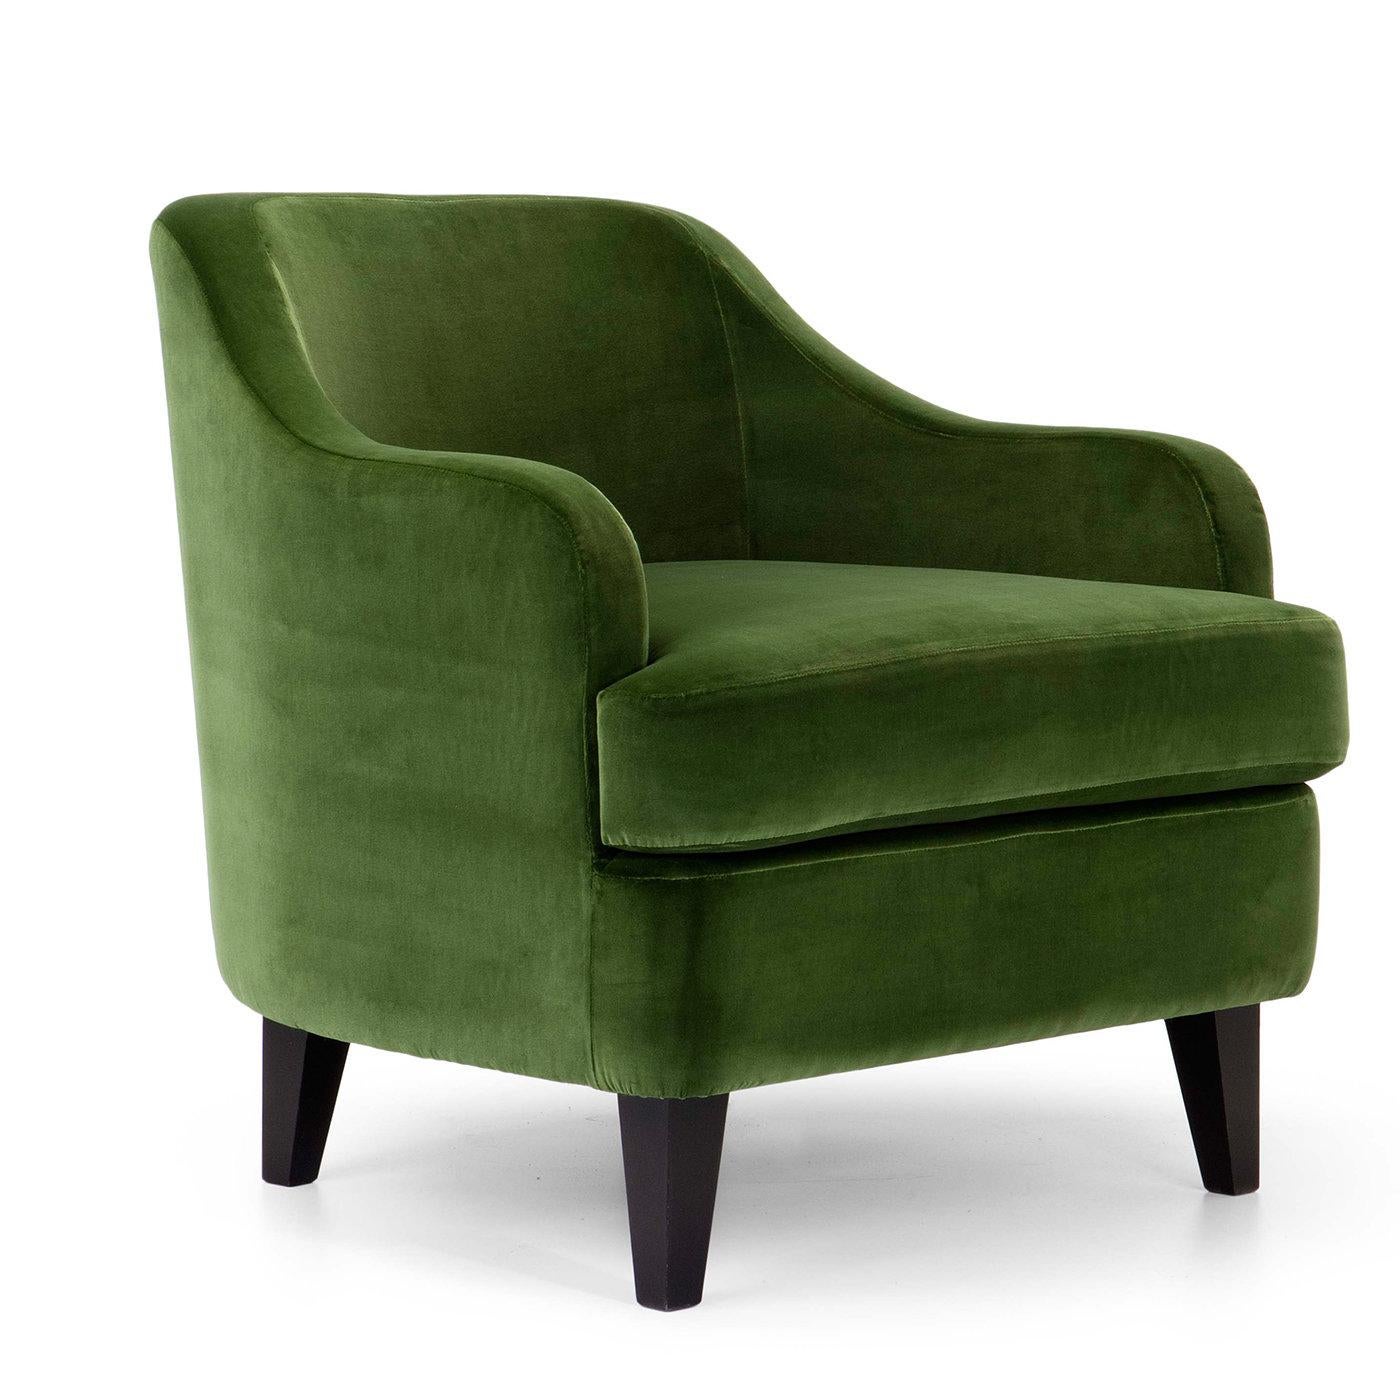 Modern functionality and classic elegance define this superb armchair whose contoured silhouette features gently rounded edges, outlining the large seat, medium backrest, and sloping armrests. Set on black solid wood legs, a sophisticated green